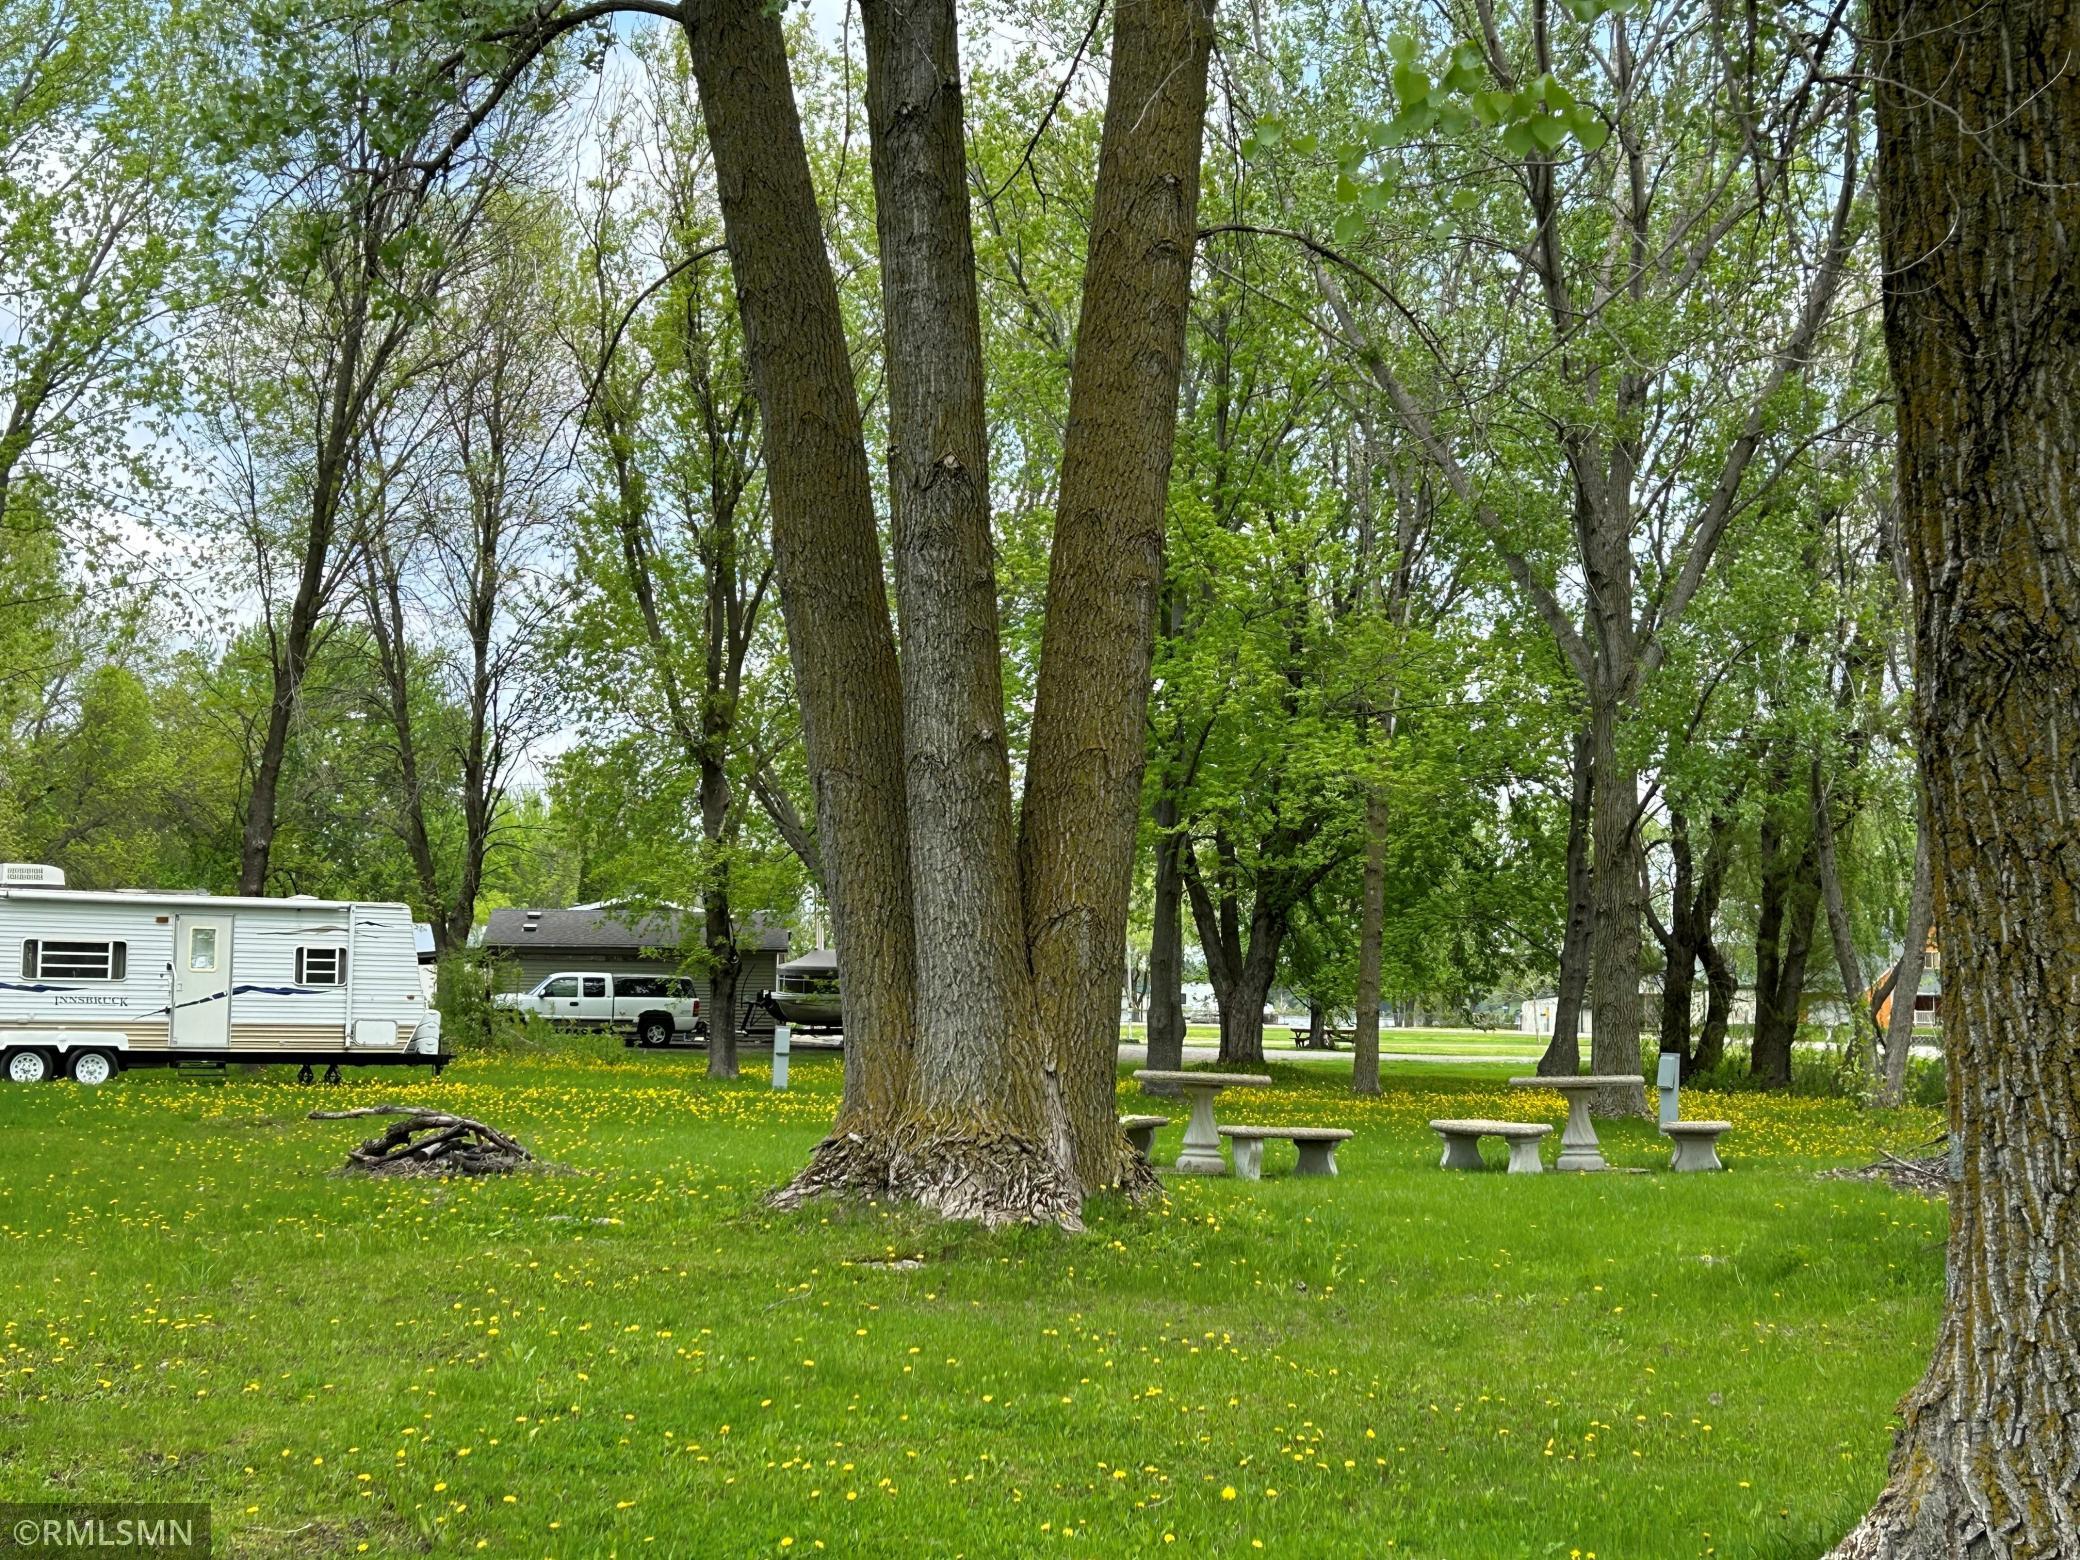 Shade trees and open space for camping and yard games. There are 3 electrical hook-ups for campers. Camper not included